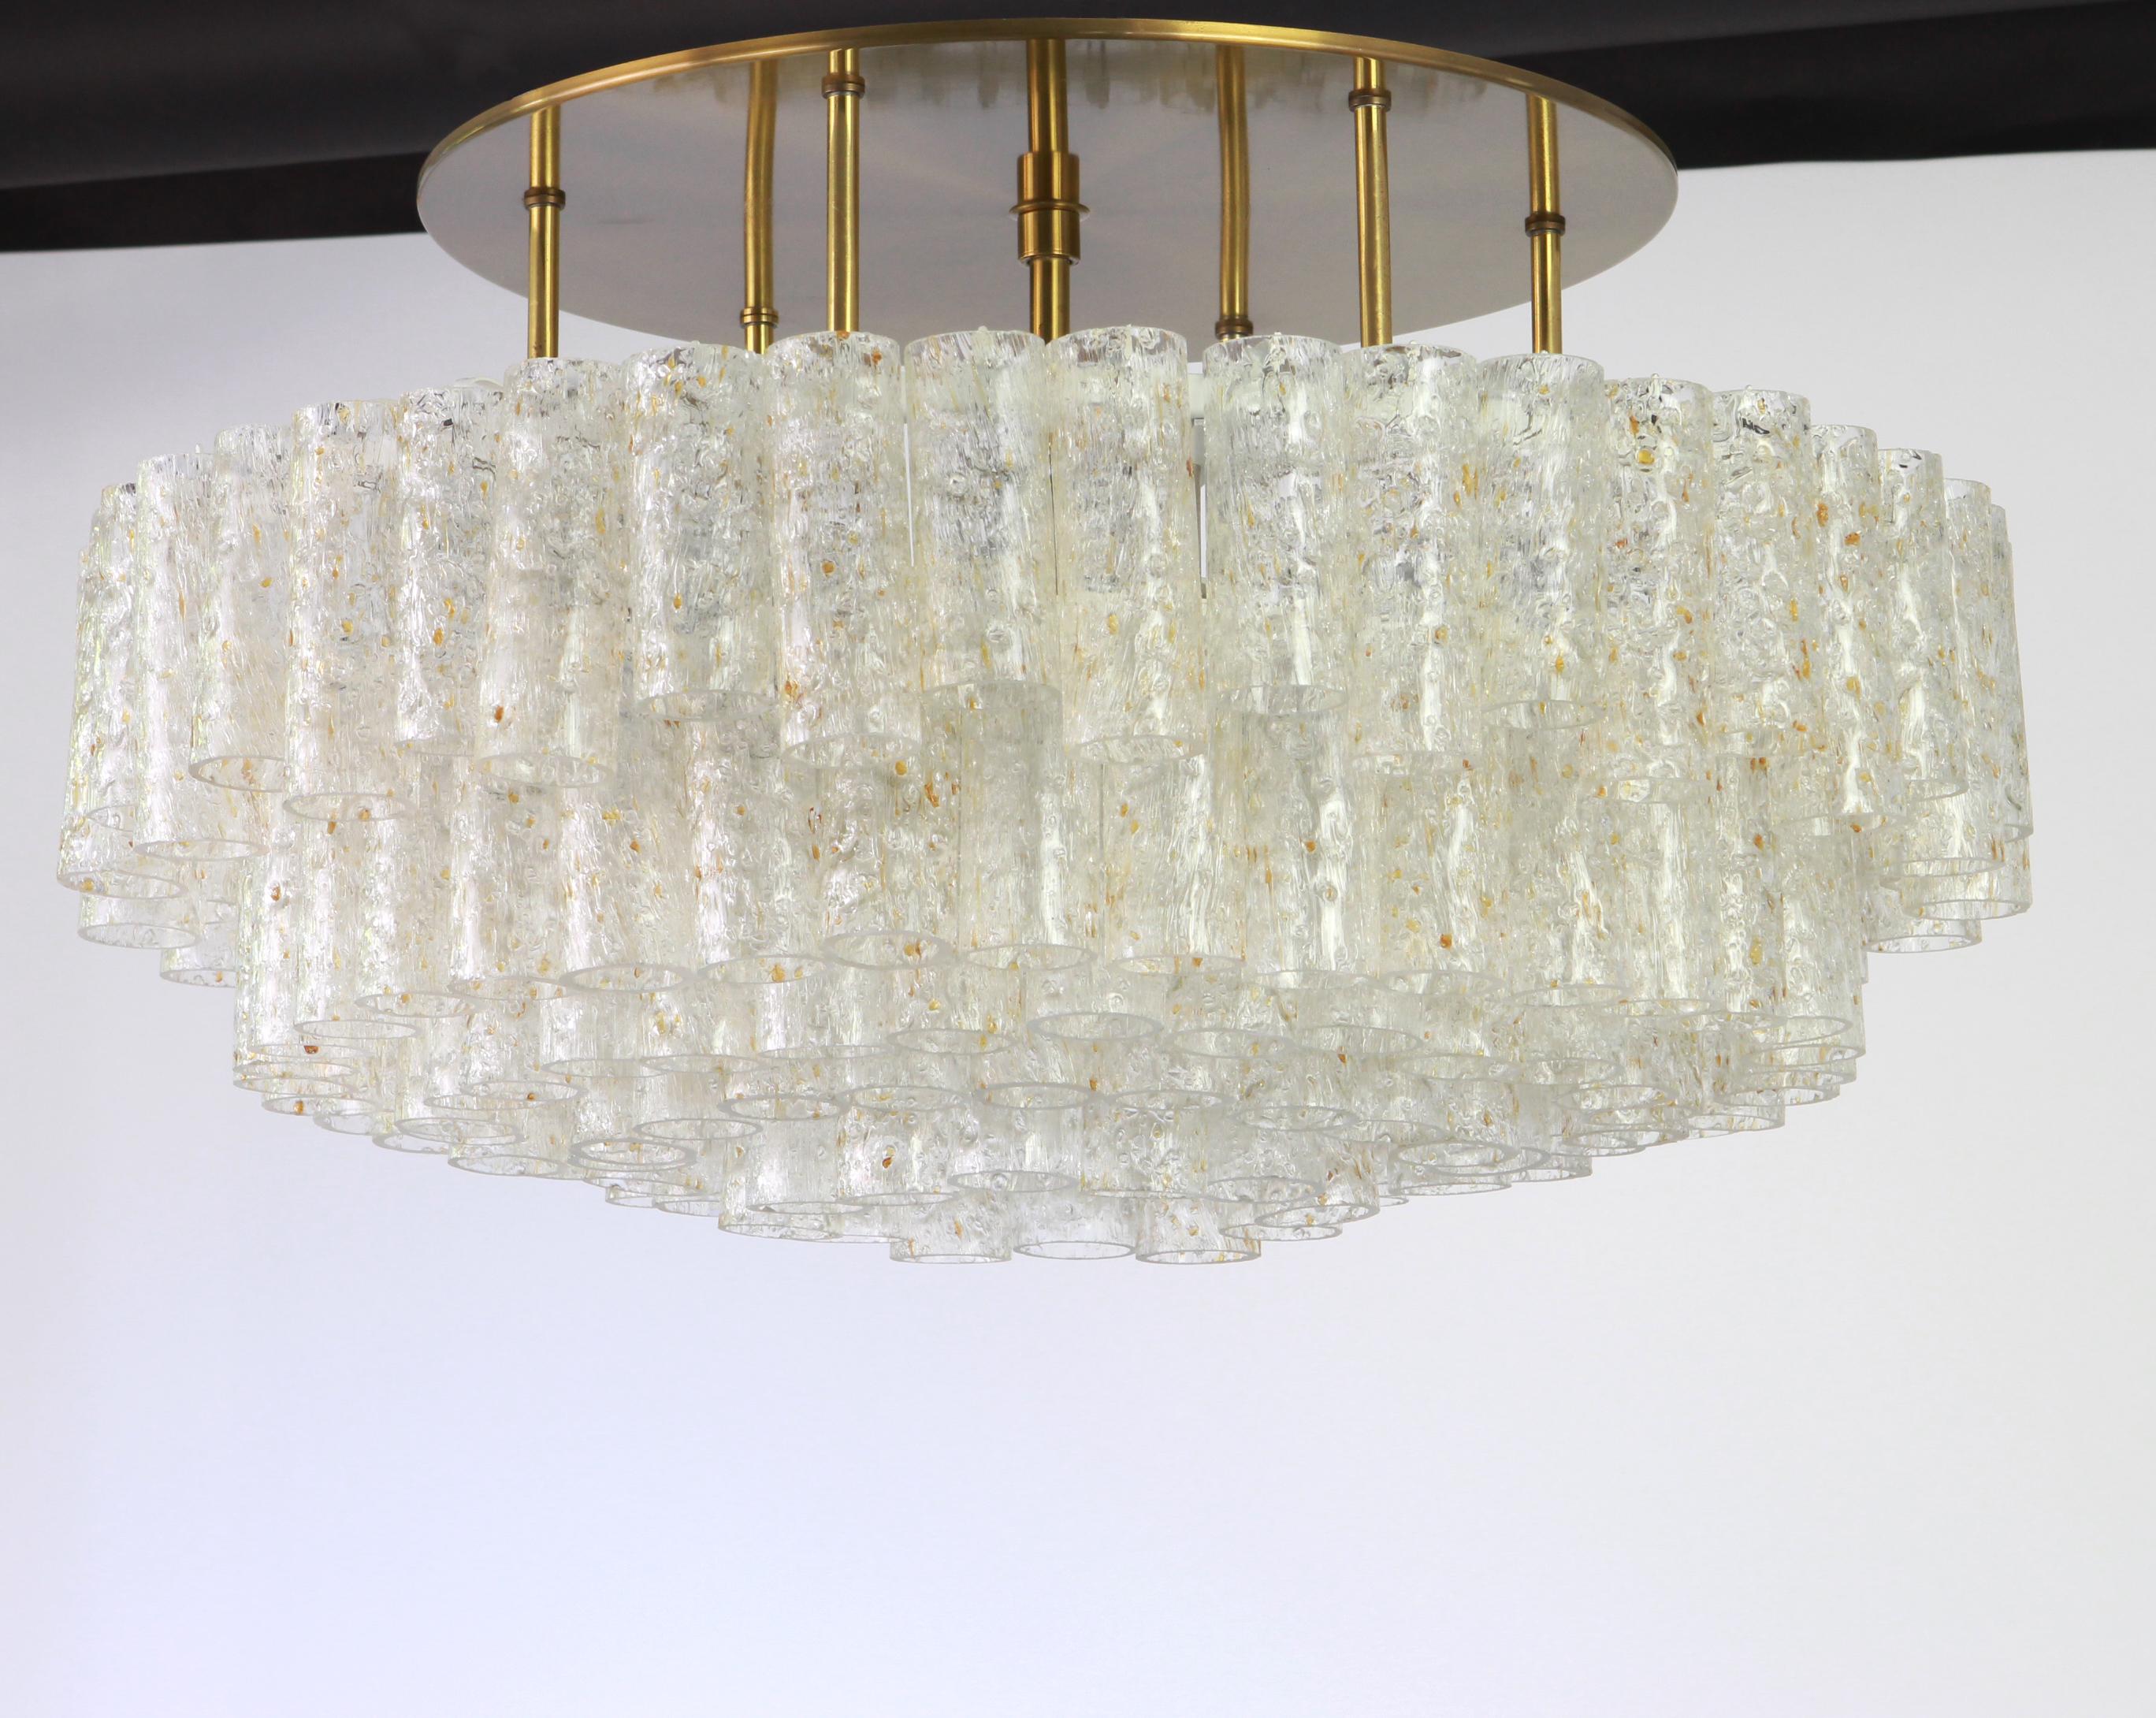 Fantastic five-tier midcentury chandelier by Doria, Germany, manufactured circa 1960-1969. Five rings of Murano glass cylinders suspended from a fixture.

Fantastic five-tier midcentury chandelier by Doria, Germany, manufactured circa 1960-1969.